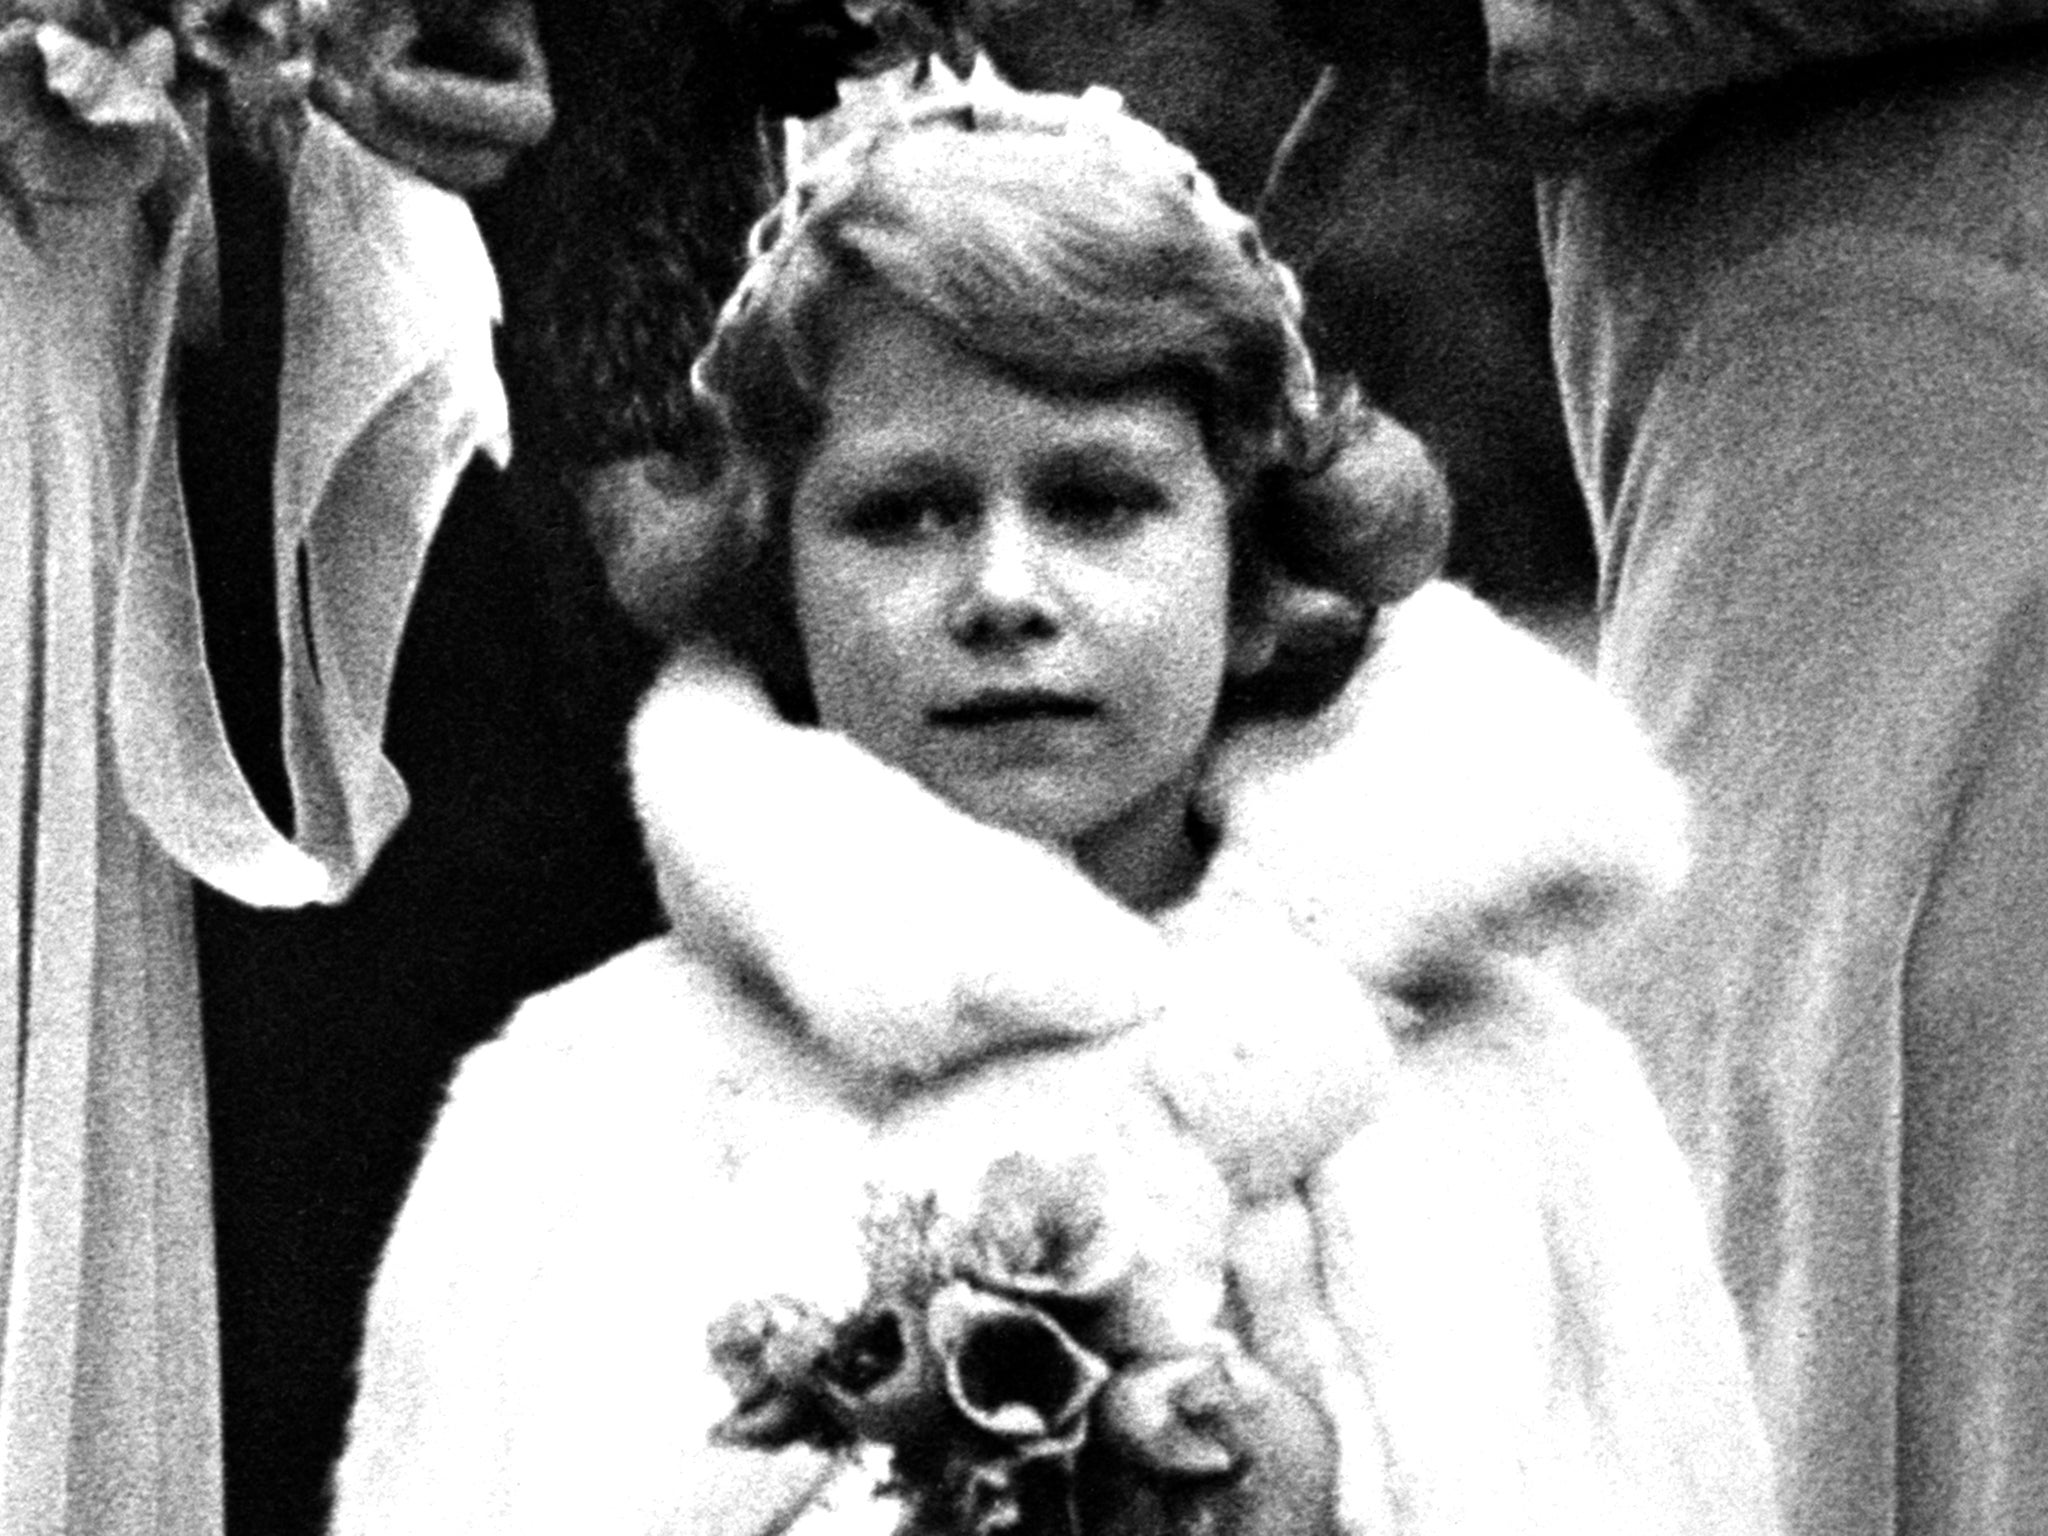 1931: A five-year-old Prince Elizabeth attends the wedding of Lady May Cambridge, great-granddaughter of Queen Victoria in Sussex